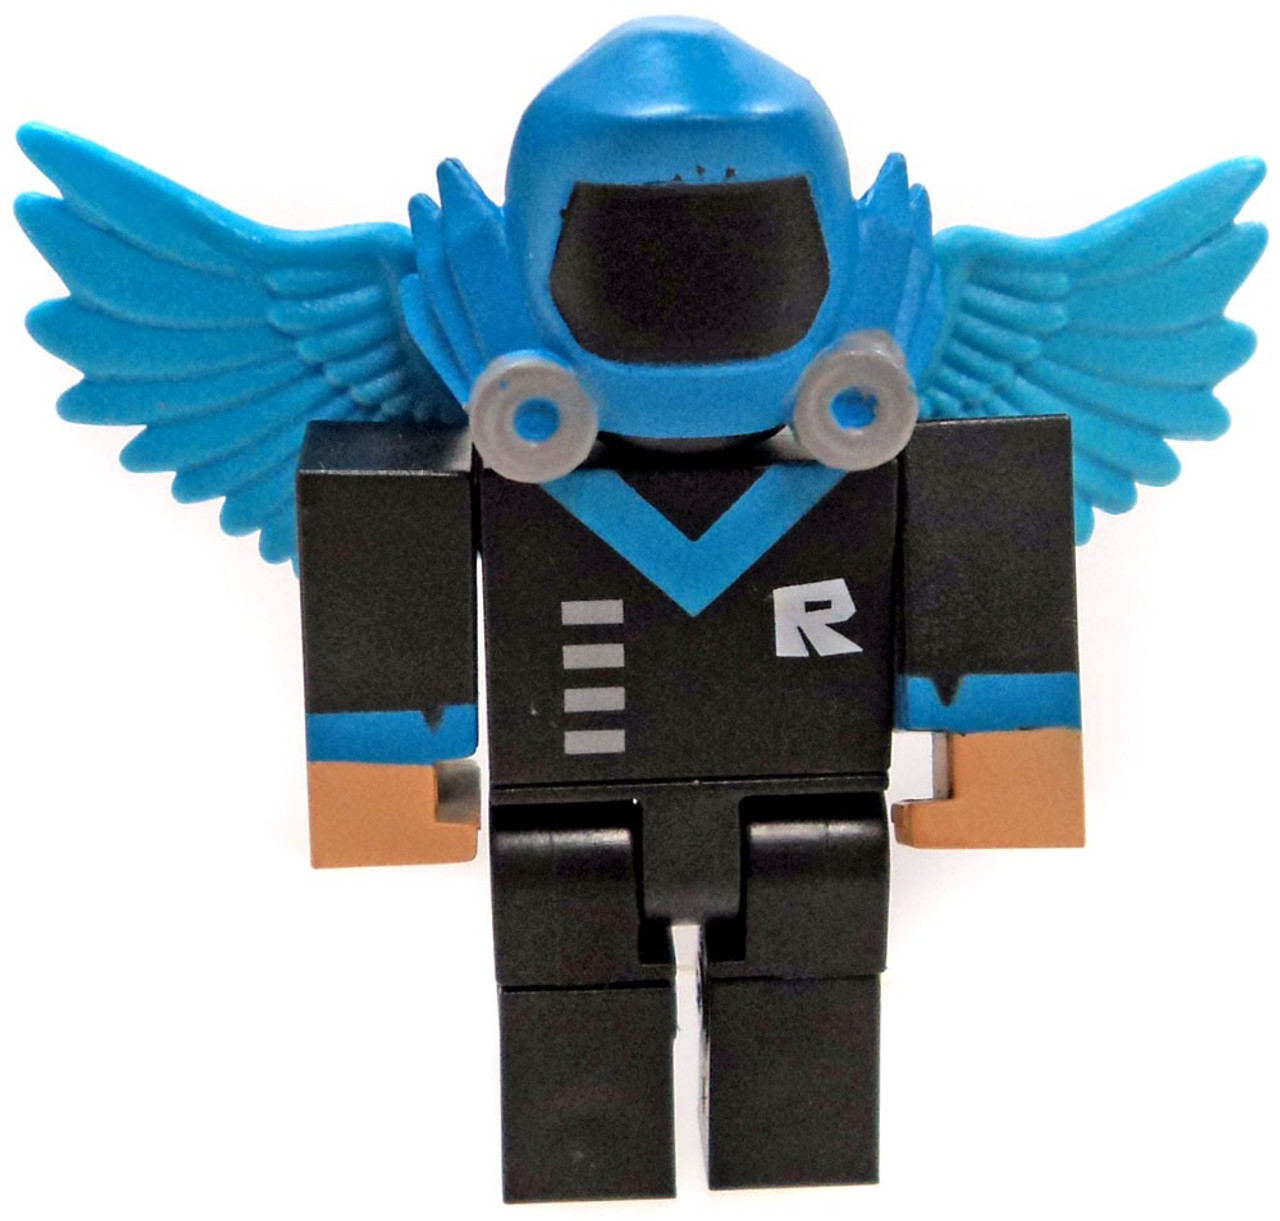 Roblox Series 2 Vurse 3 Minifigure Includes Online Code Loose Jazwares Toywiz - roblox series 2 cindering action figure mystery box